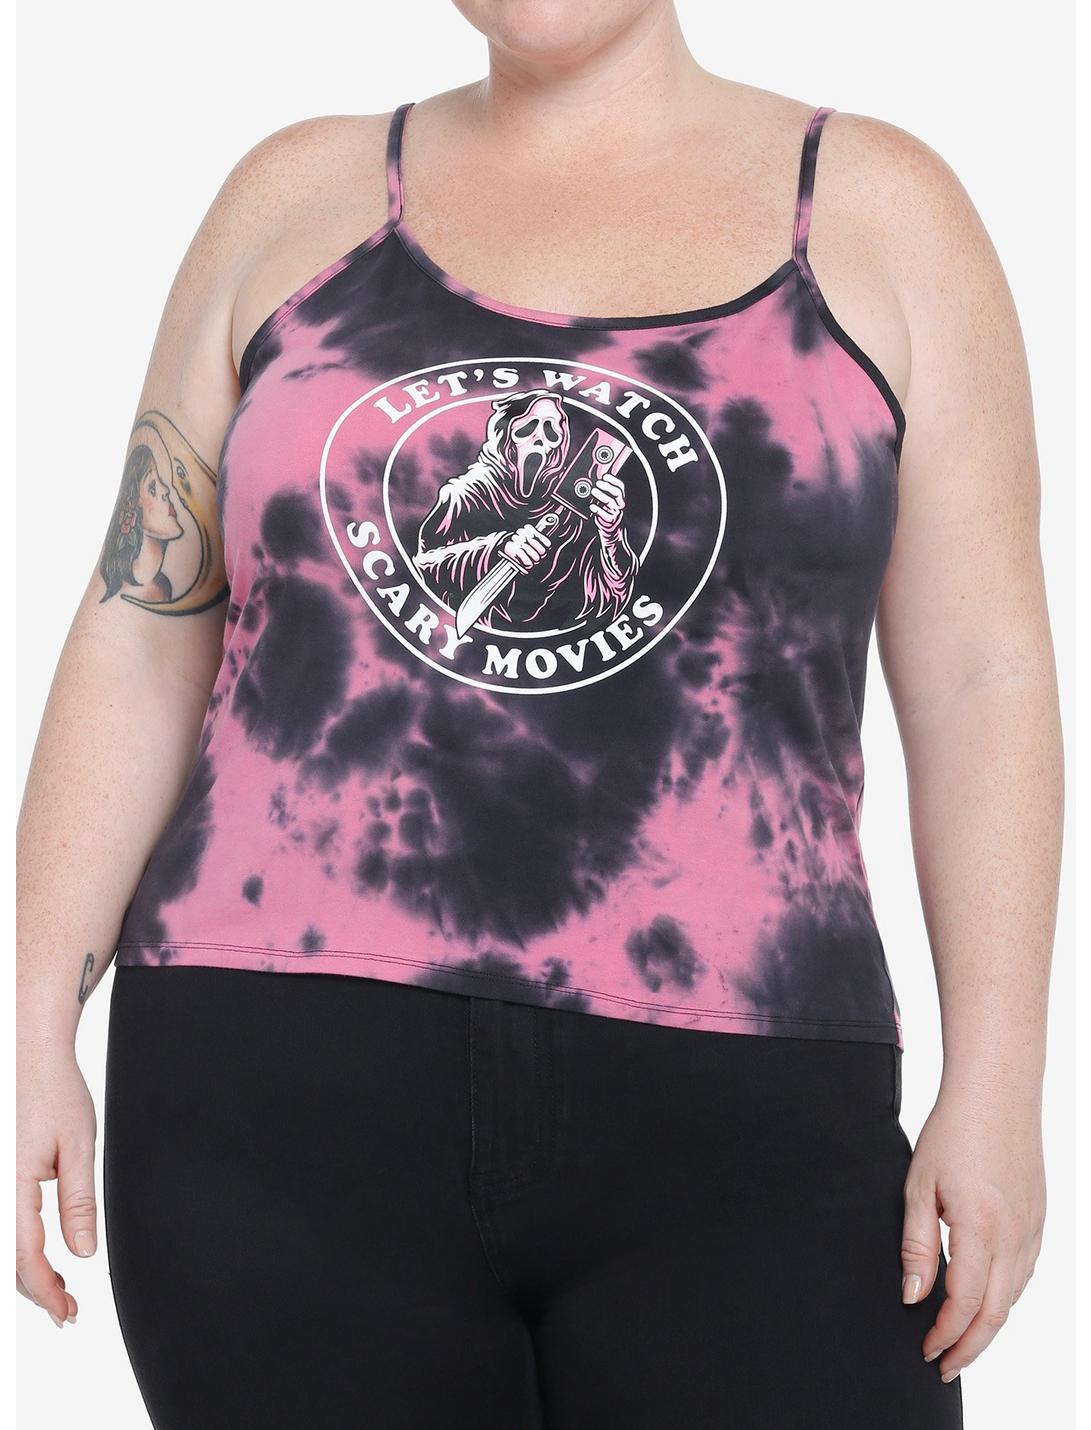 Scream Ghost Face Scary Movies Tie-Dye Girls Cami Plus Size, MULTI, hi-res